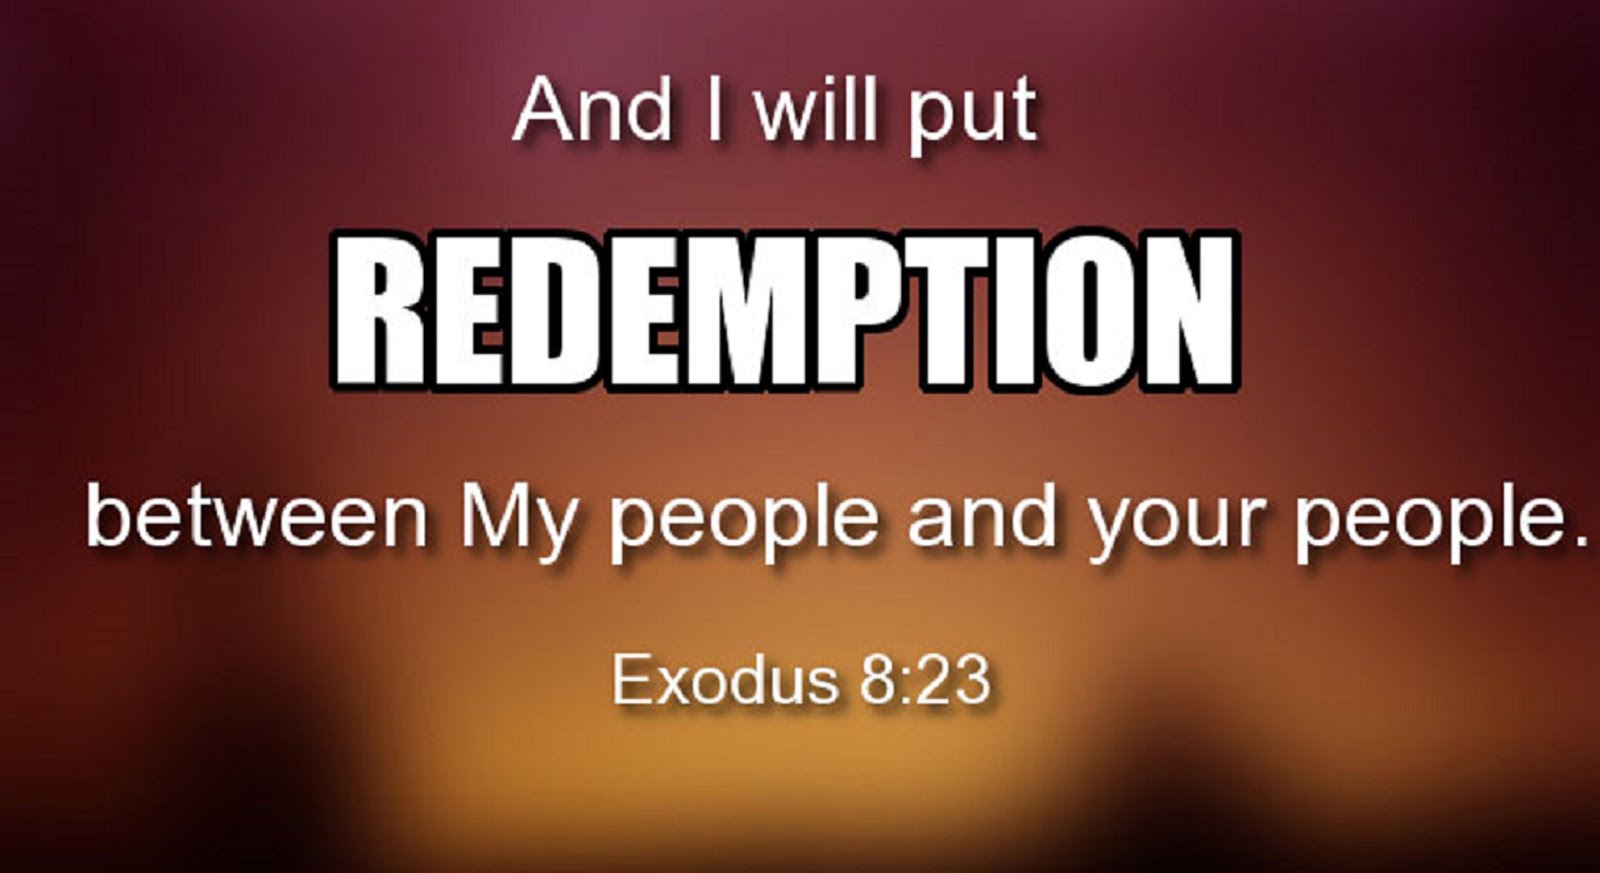 AND I WILL PUT REDEMPTION BETWEEN MY PEOPLE AND YOUR PEOPLE